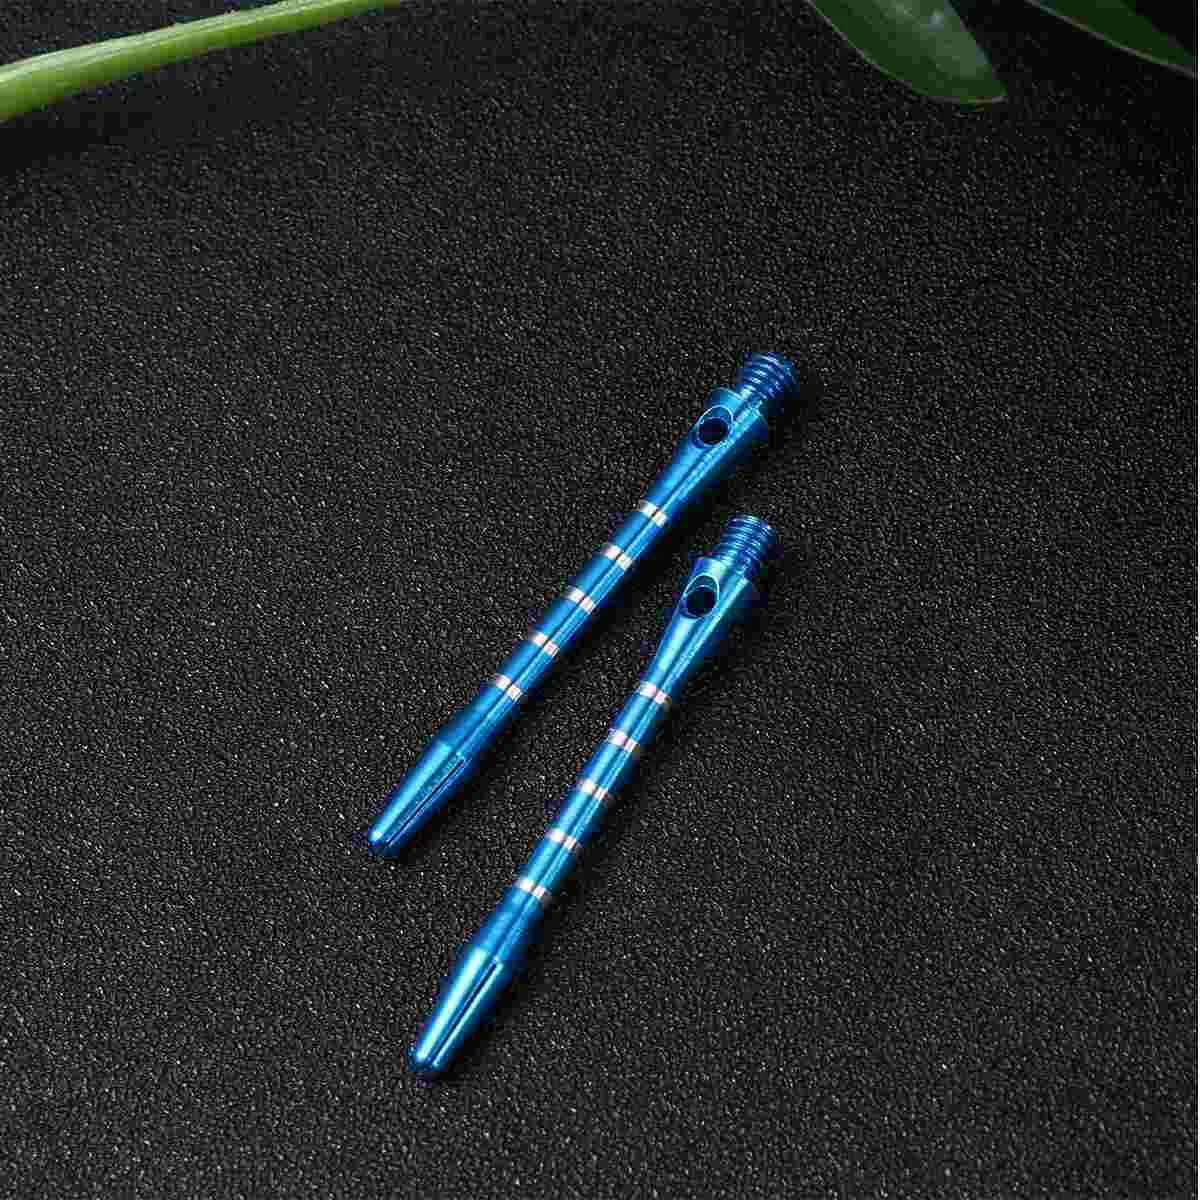 

20pcs Aluminum Dart Shafts 2BA Dart Stems Throwing Fitting with Ring for Outdoor Sports Events Activities Blue